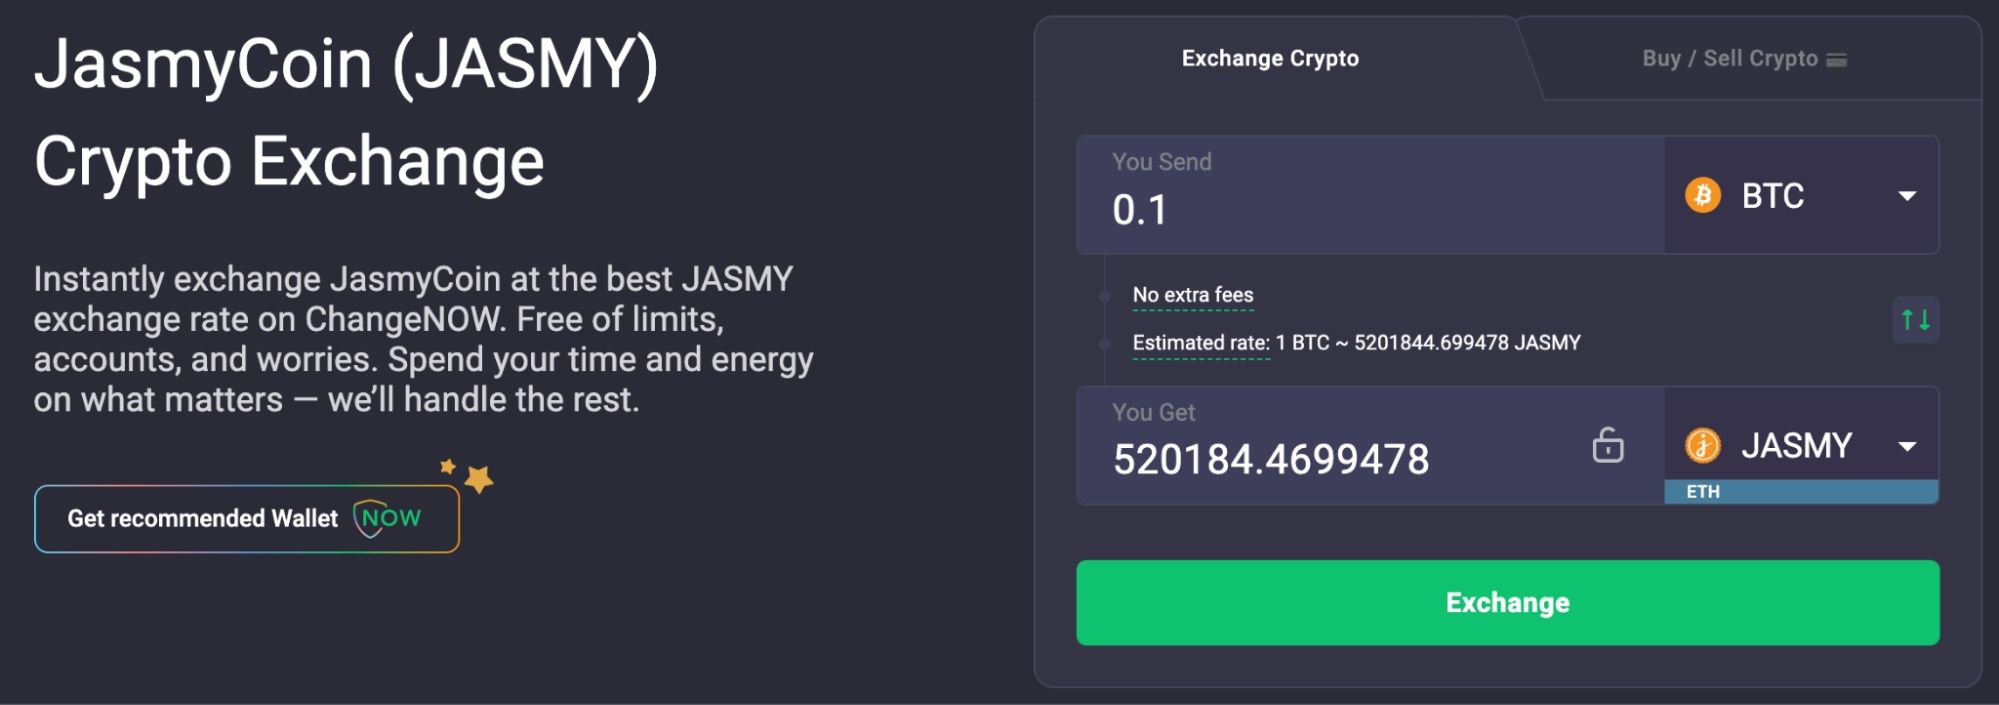 How to buy Jasmy Coin - step 1